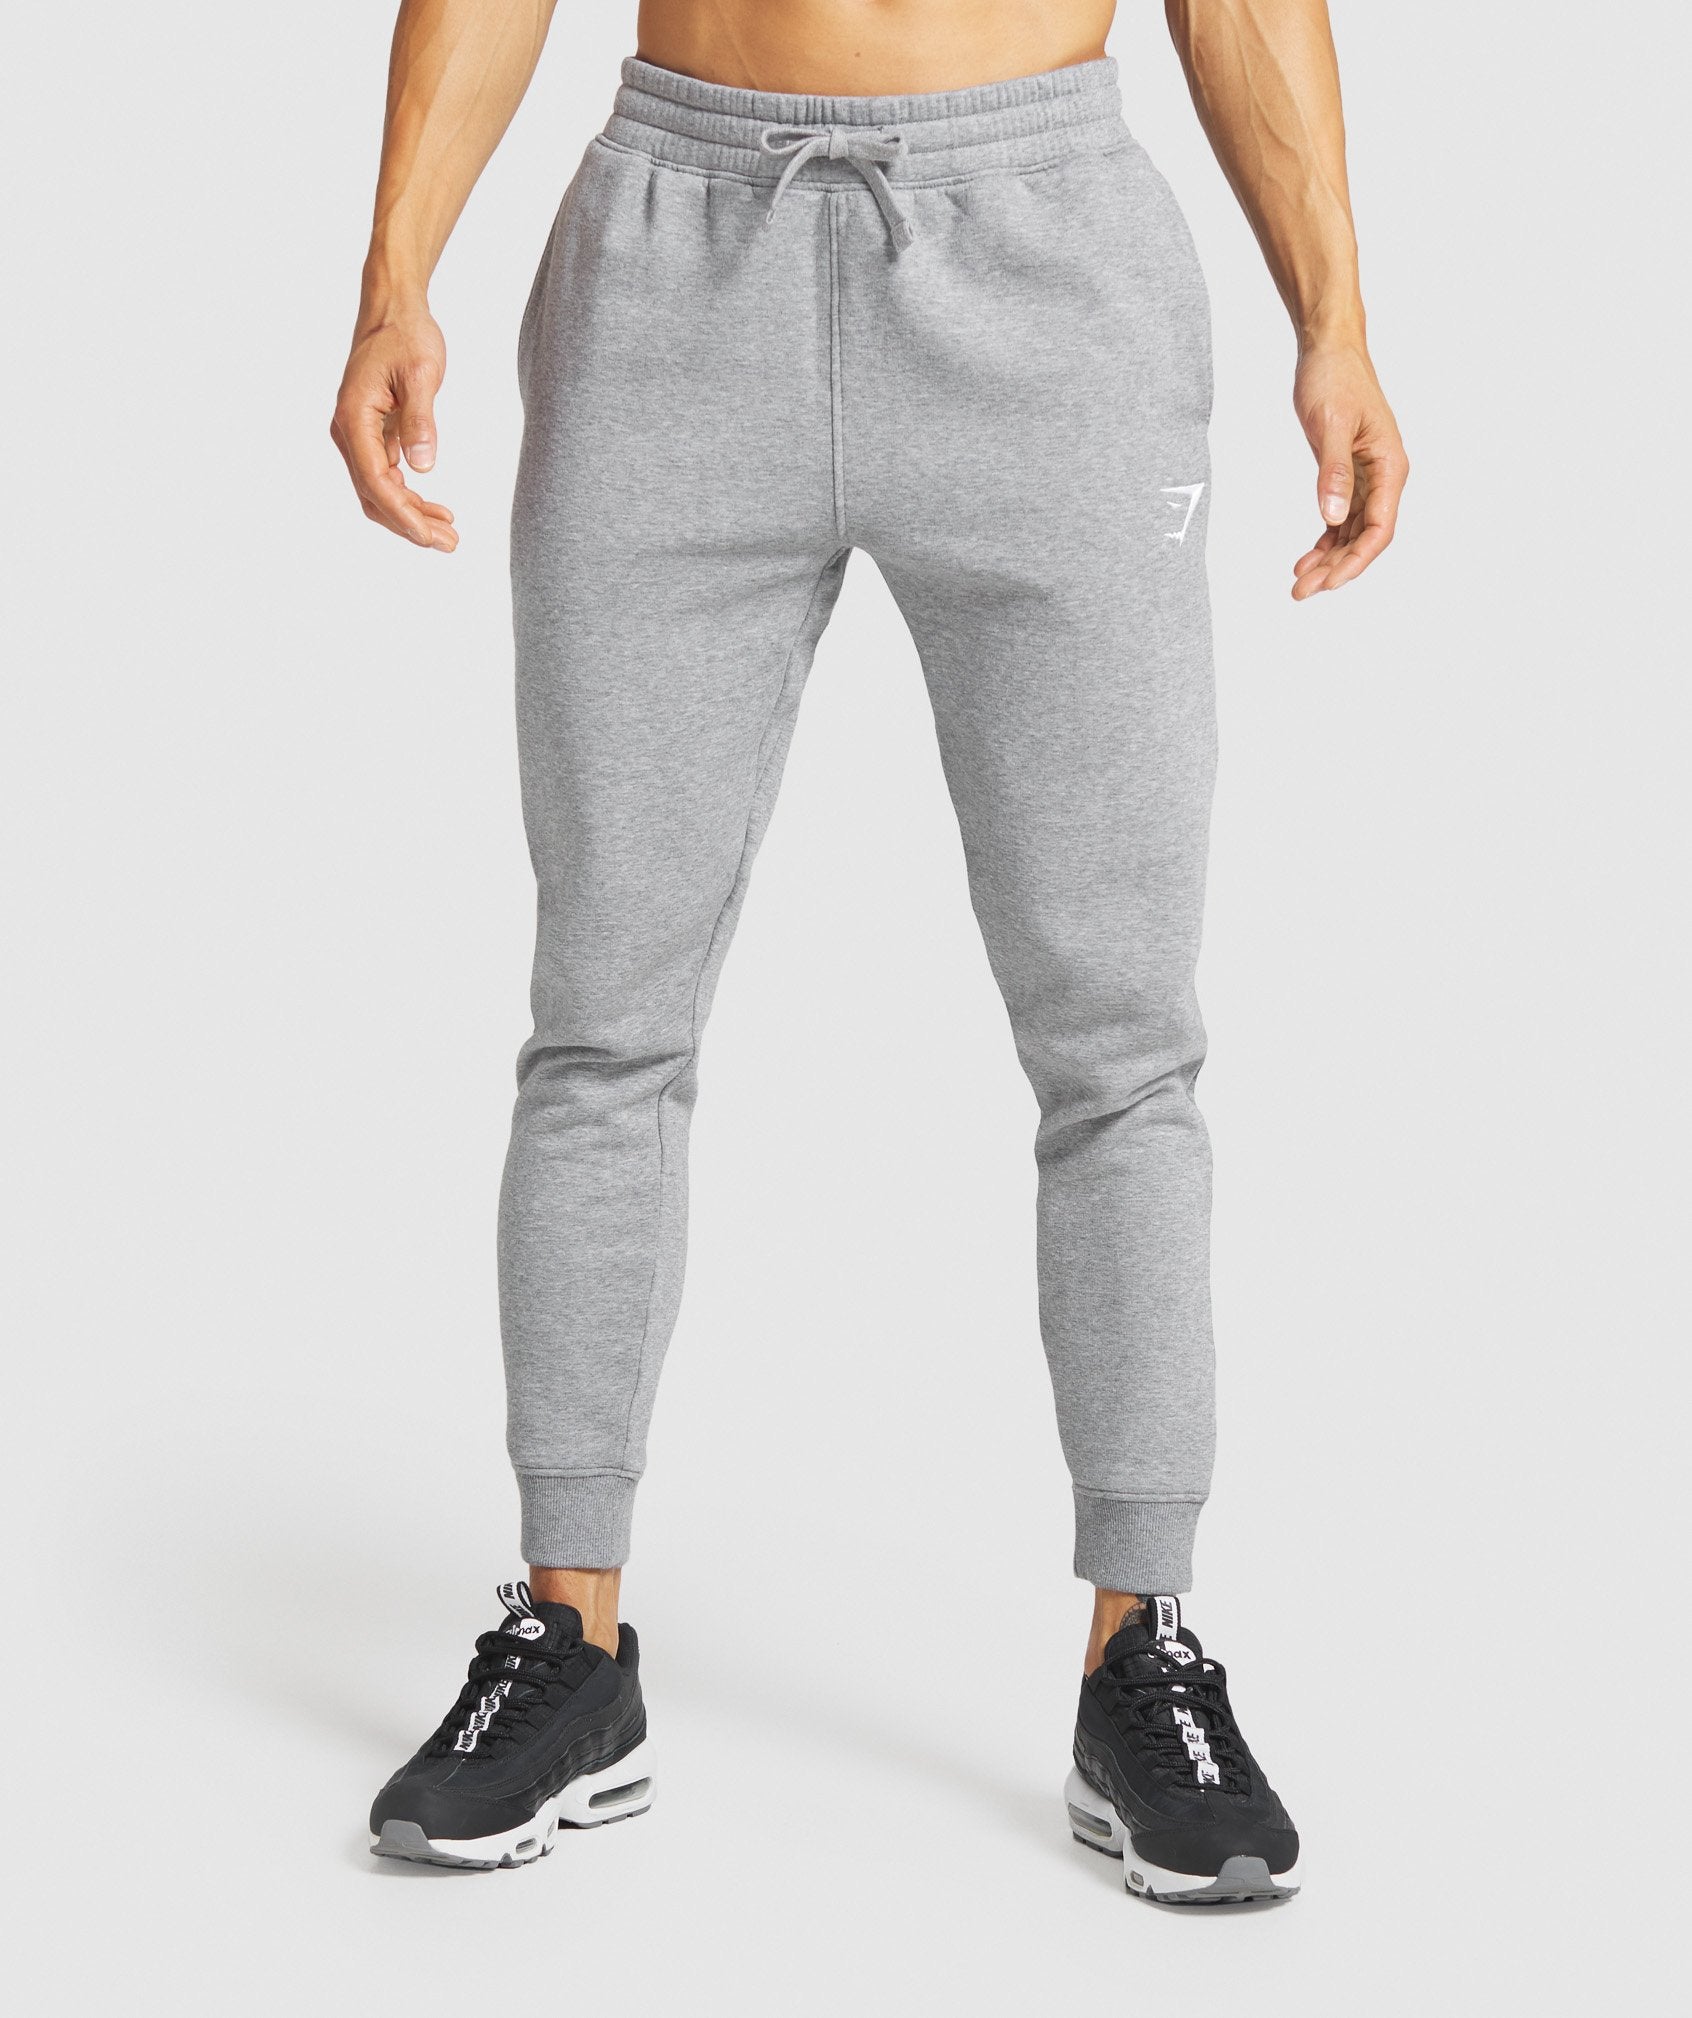 Gymshark Men's Sweatpants With Zip Up / Down Ankles, Size Small, MINT!